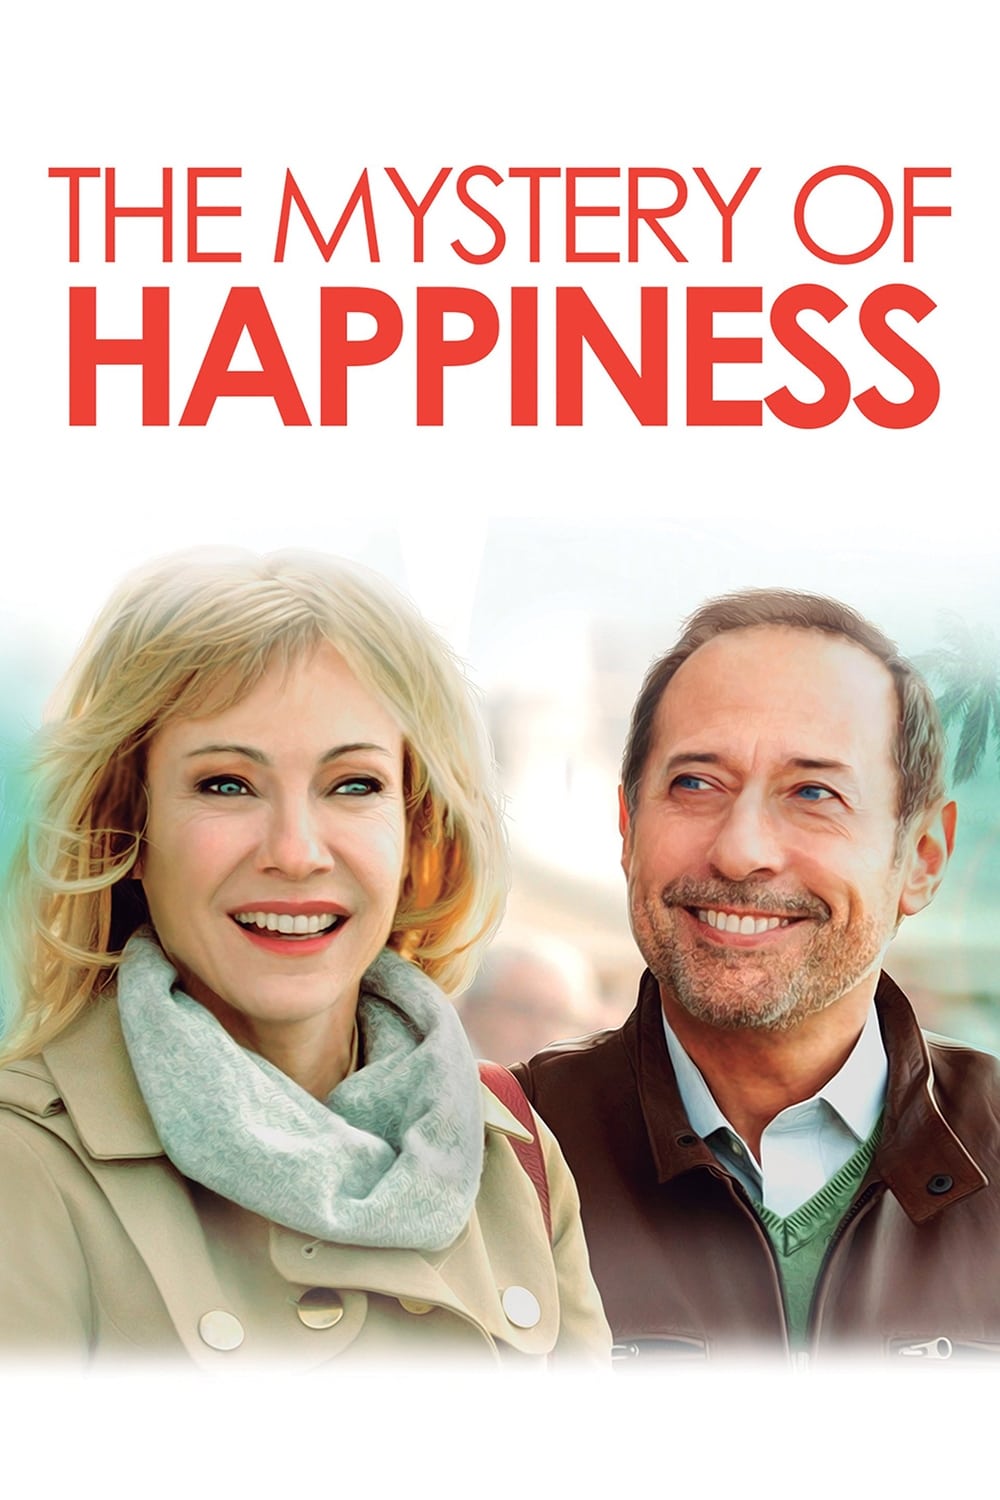 The Mystery of Happiness (2014)